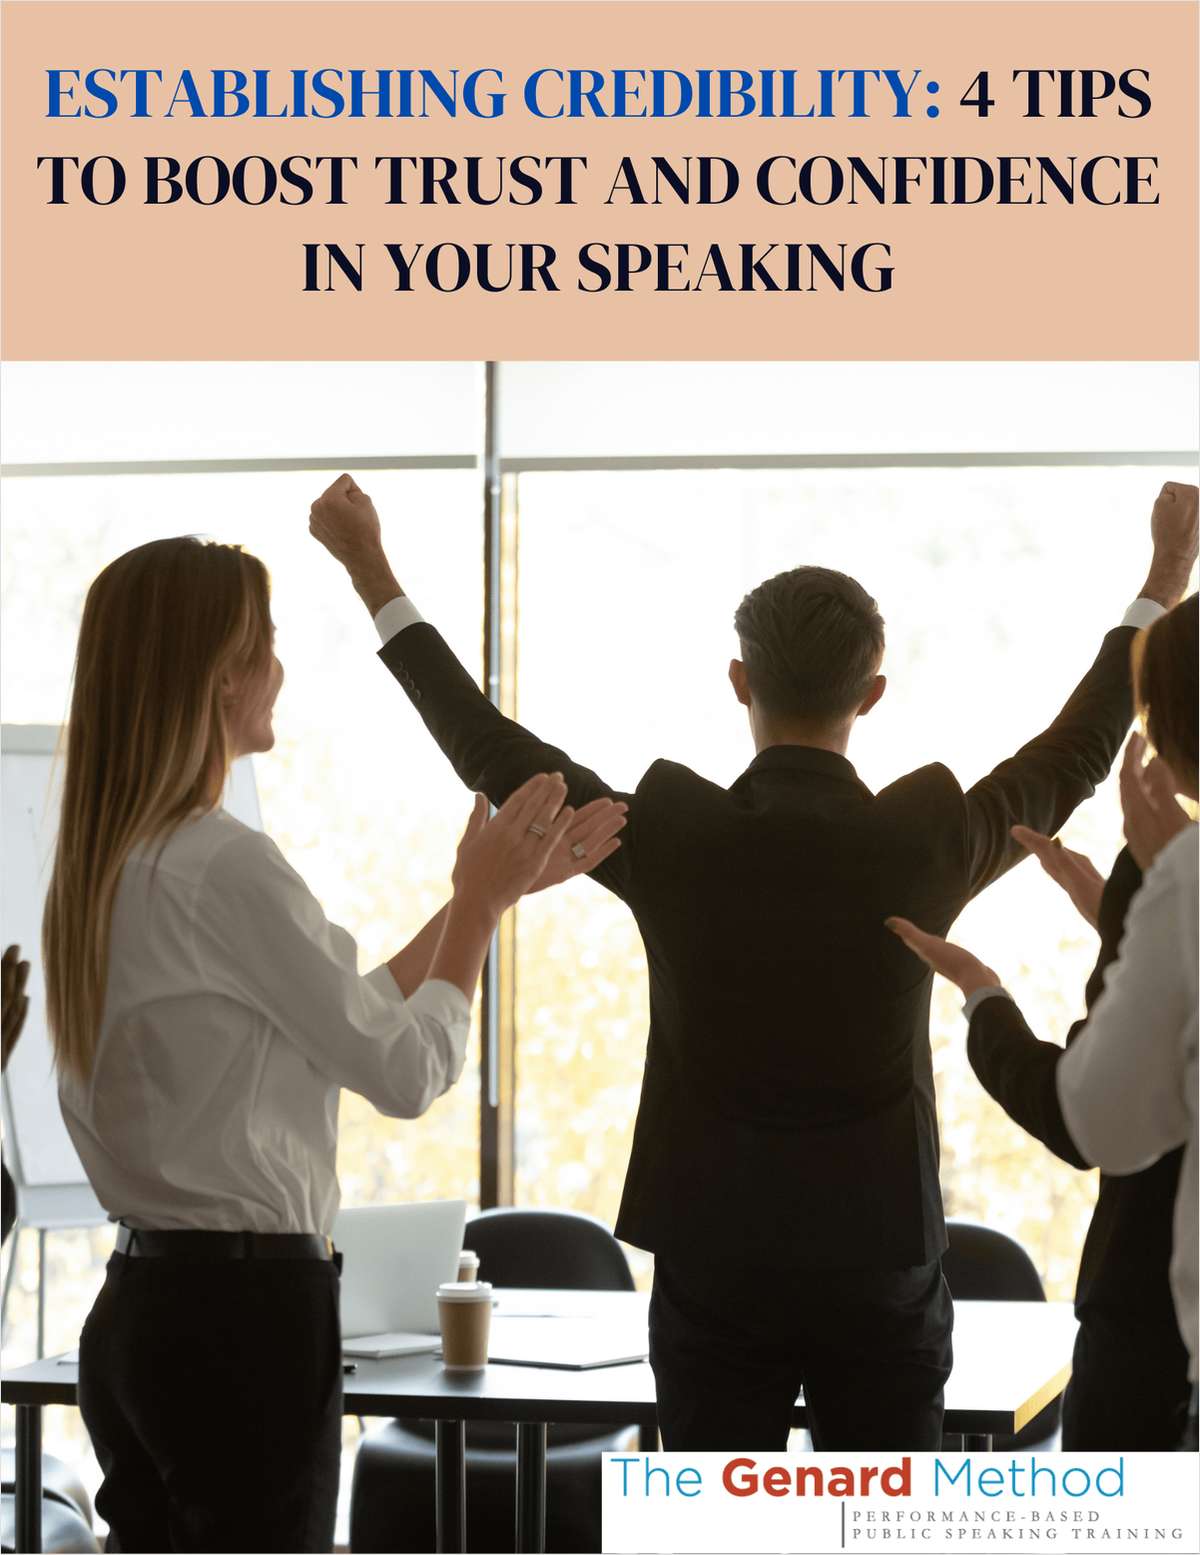 Establishing Credibility: 4 Tips to Boost Trust and Confidence In Your Speaking